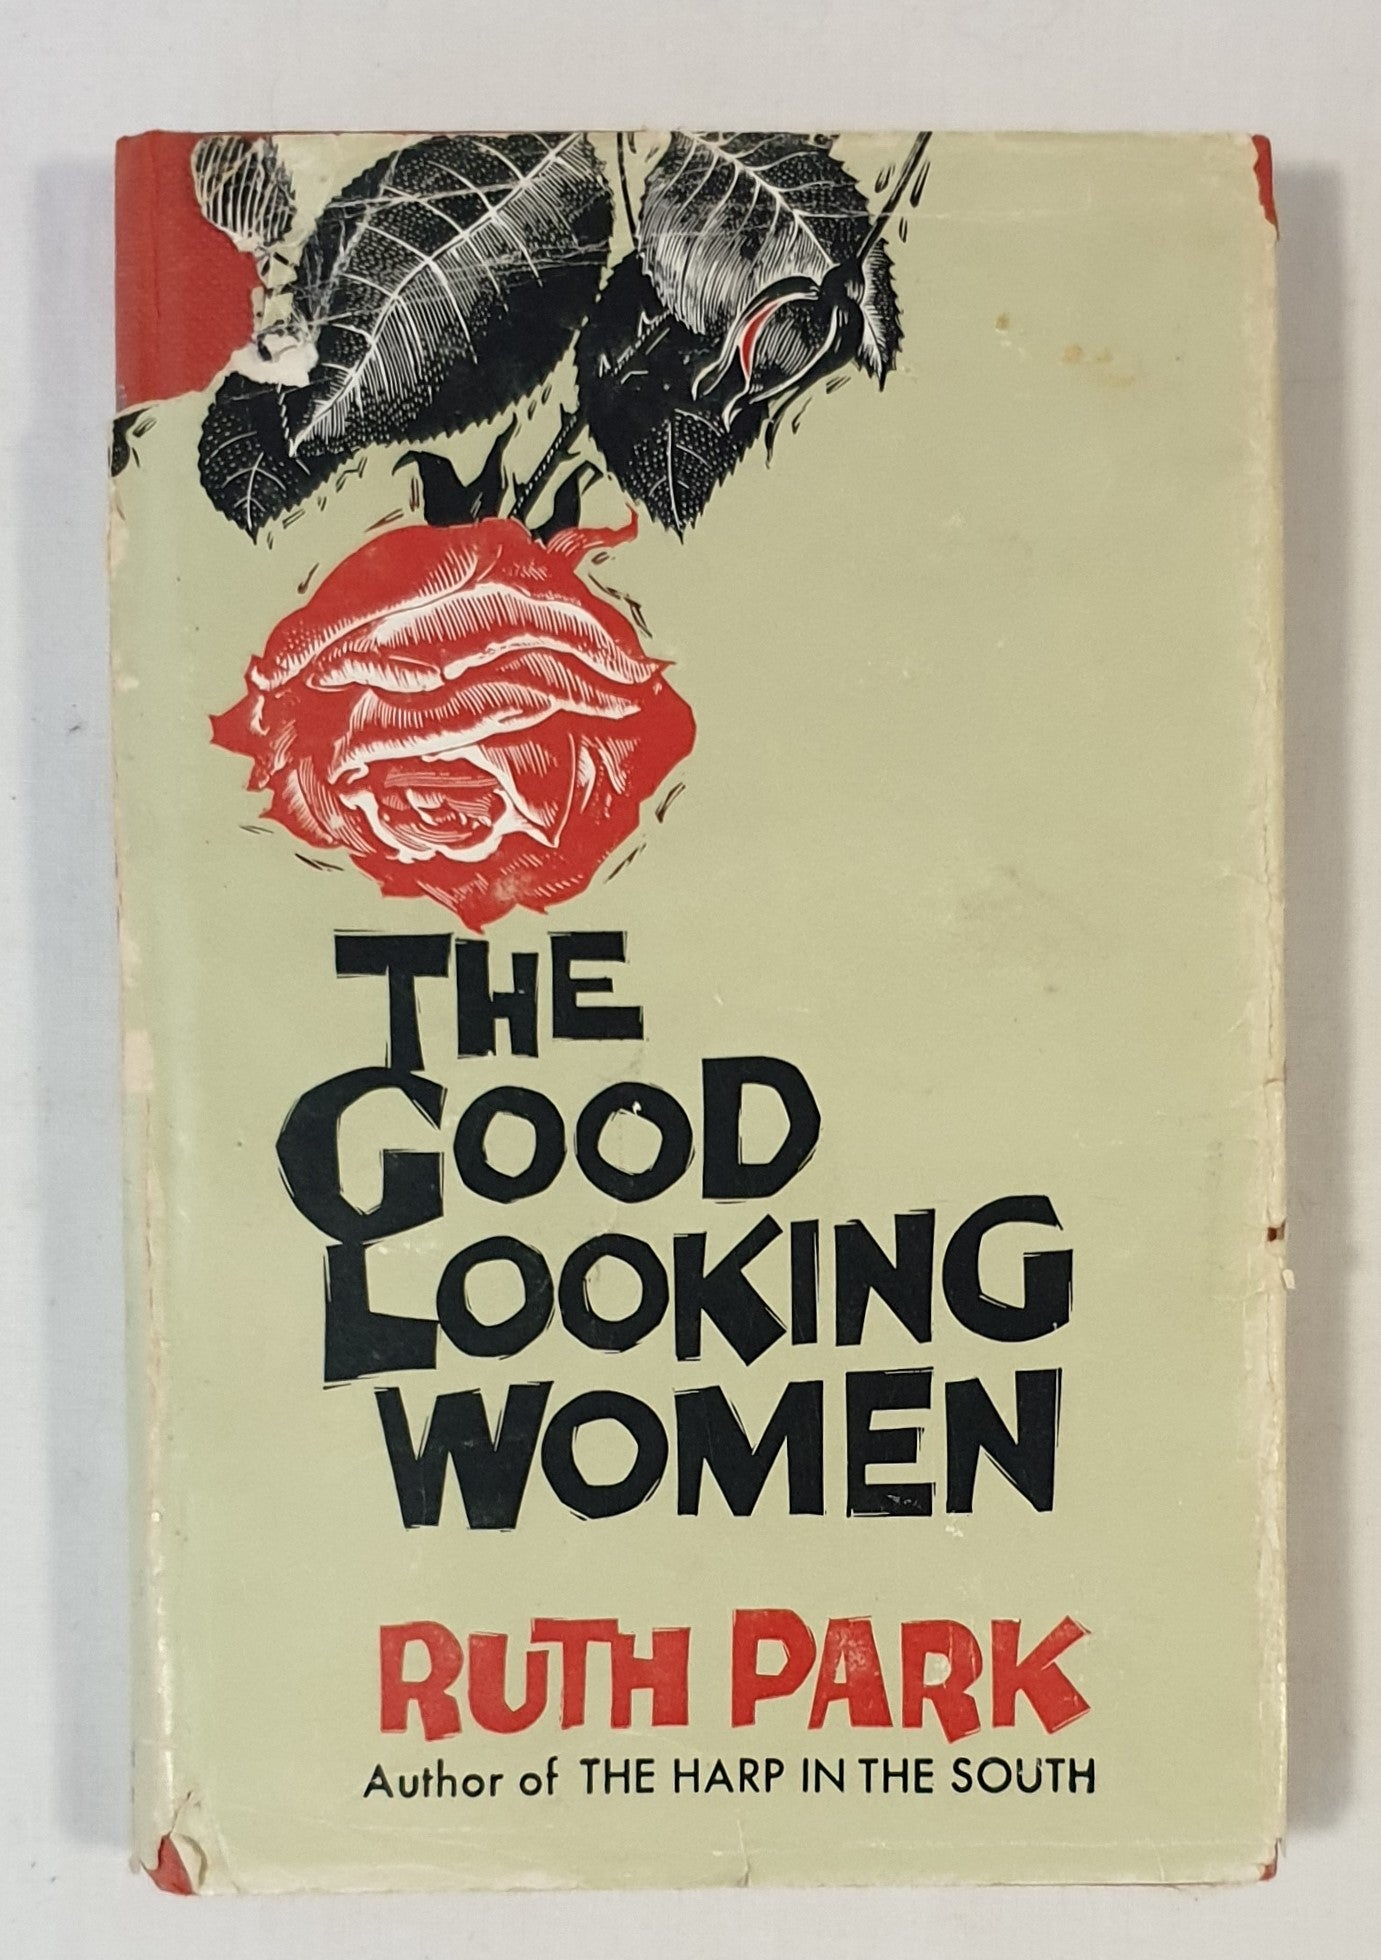 The Good Looking Women by Ruth Park